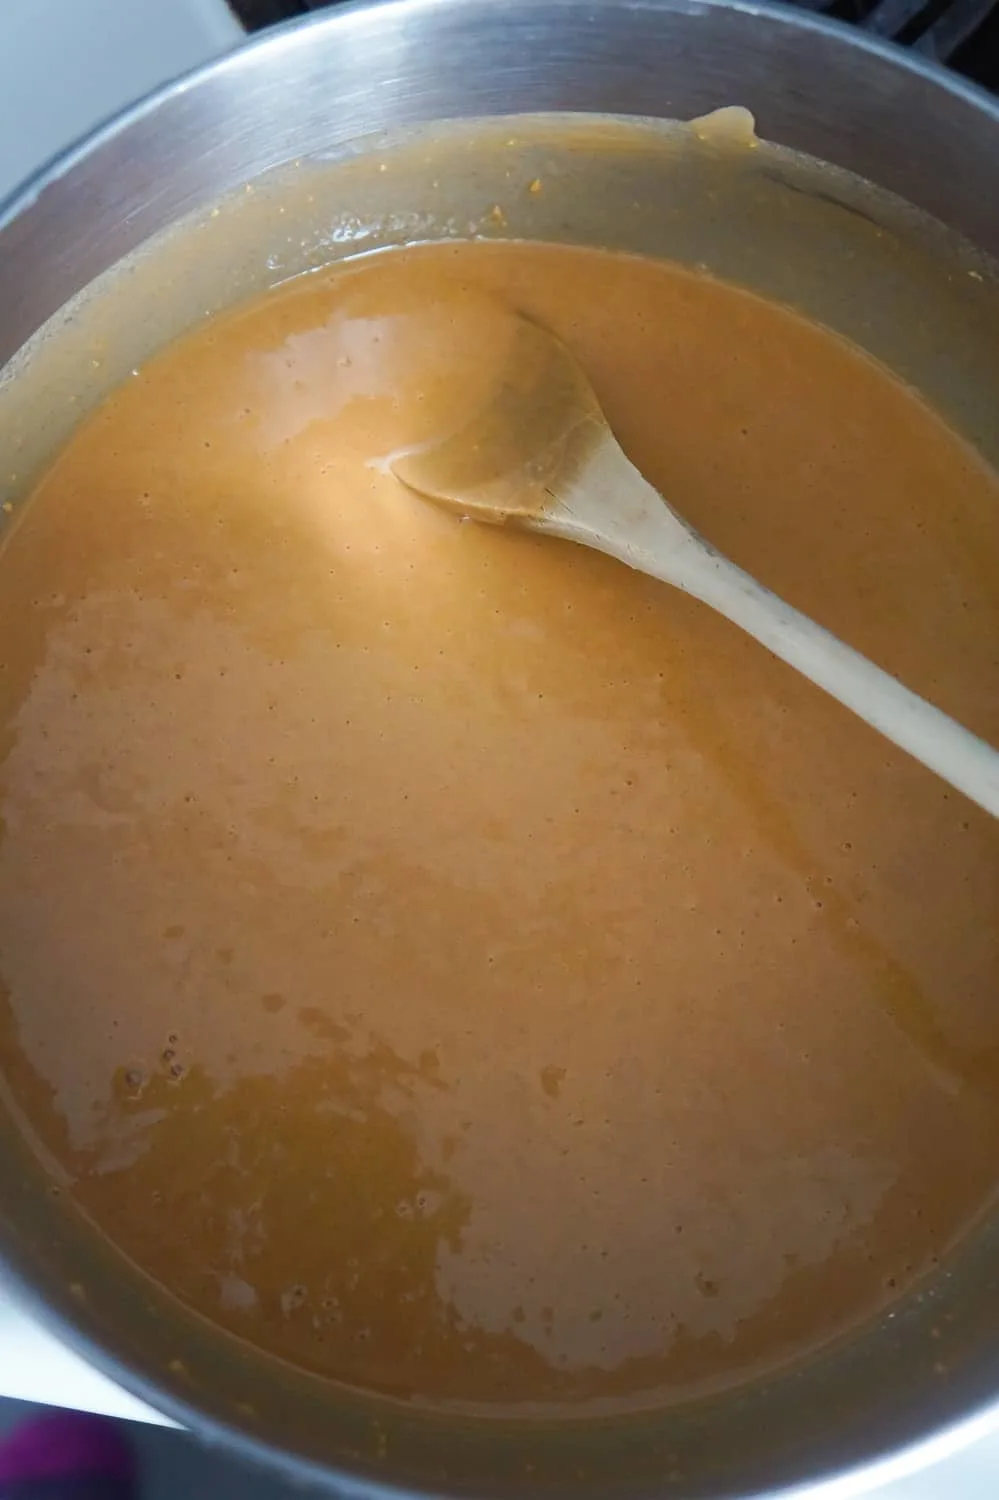 melted peanut butter mixture in a large saucepan